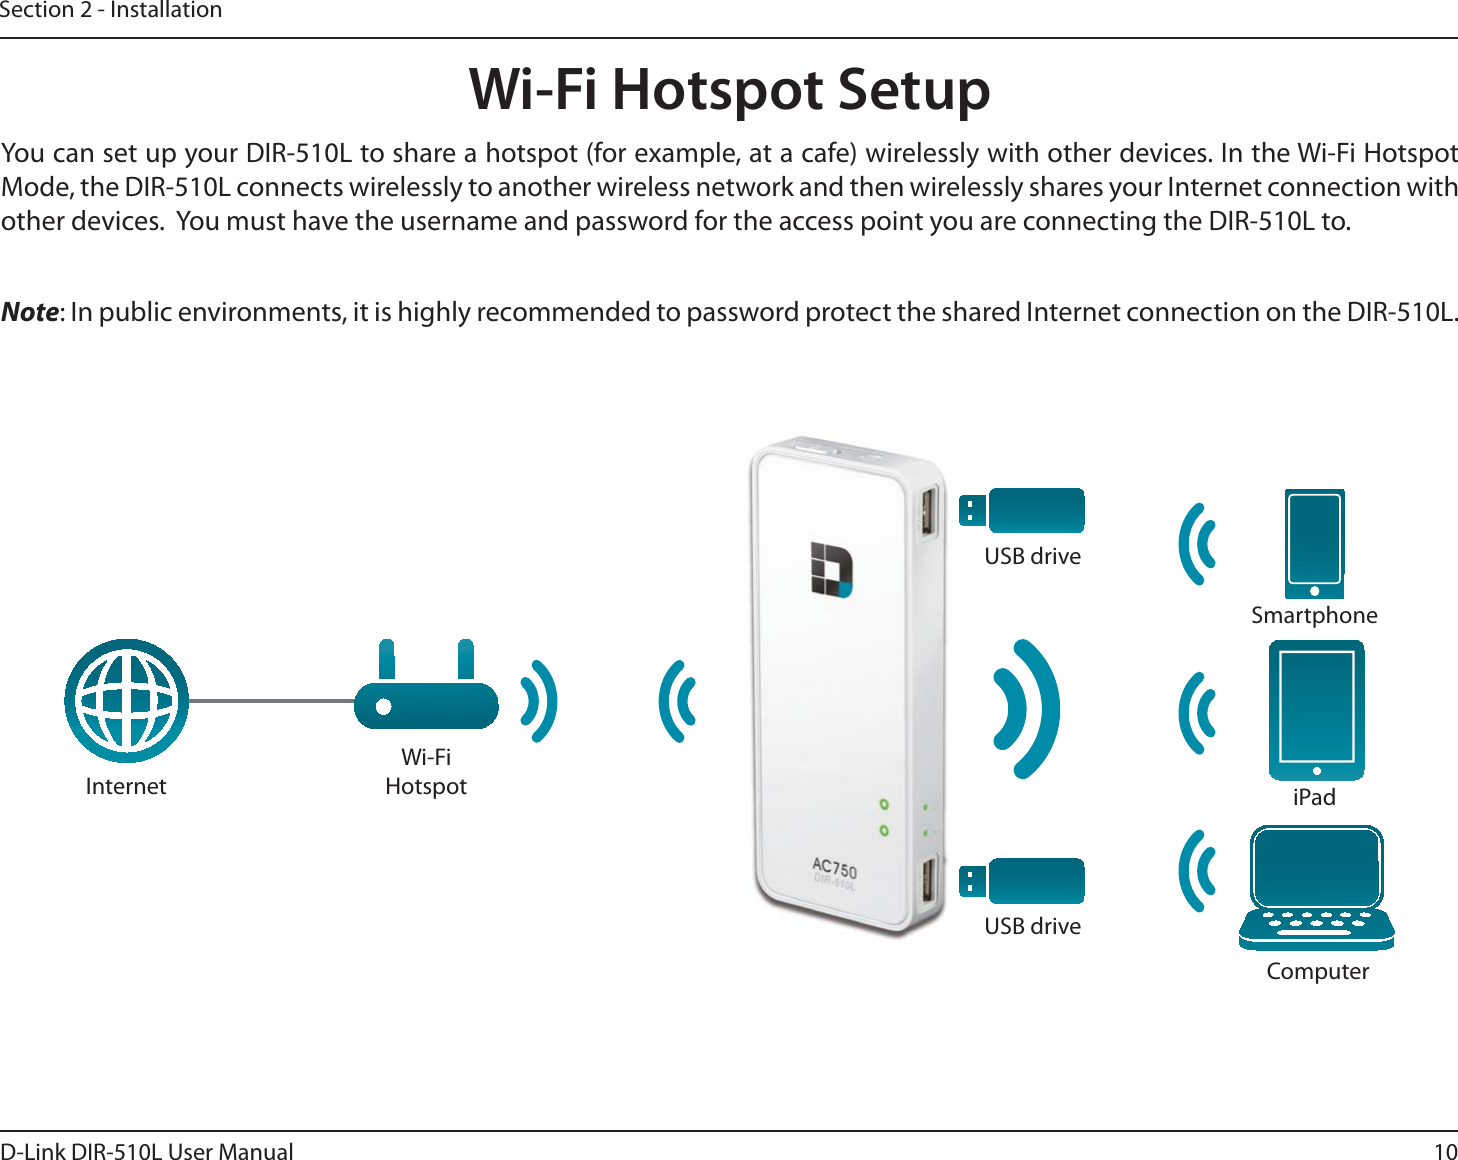 10D-Link DIR-510L User ManualSection 2 - InstallationWi-Fi Hotspot SetupComputeriPadSmartphoneUSB driveUSB driveWi-Fi HotspotInternetYou can set up your DIR-510L to share a hotspot (for example, at a cafe) wirelessly with other devices. In the Wi-Fi Hotspot Mode, the DIR-510L connects wirelessly to another wireless network and then wirelessly shares your Internet connection with other devices.  You must have the username and password for the access point you are connecting the DIR-510L to.Note: In public environments, it is highly recommended to password protect the shared Internet connection on the DIR-510L.